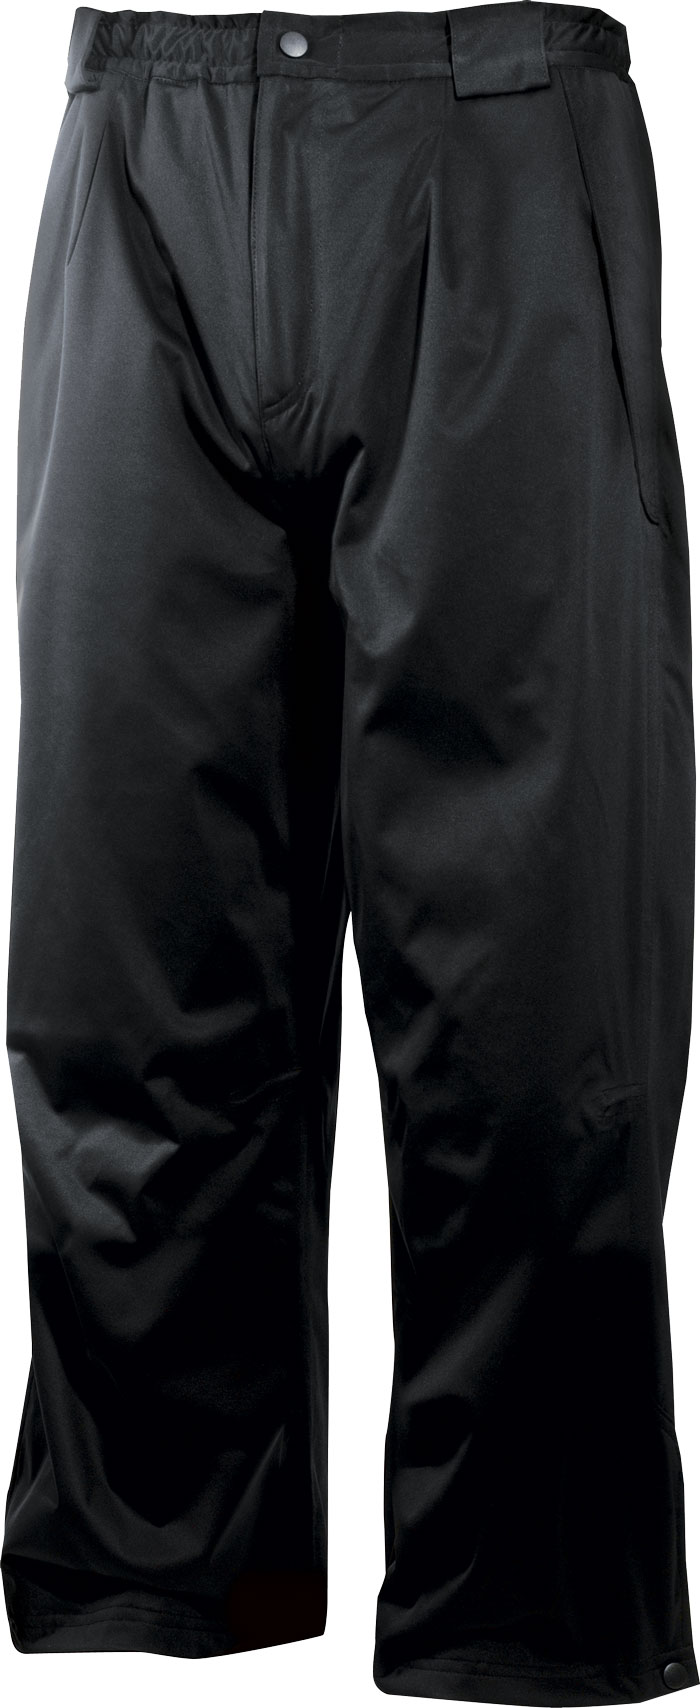 Sunderland Vancouver Waterproof Golf Trousers  ODwyers Golf Store